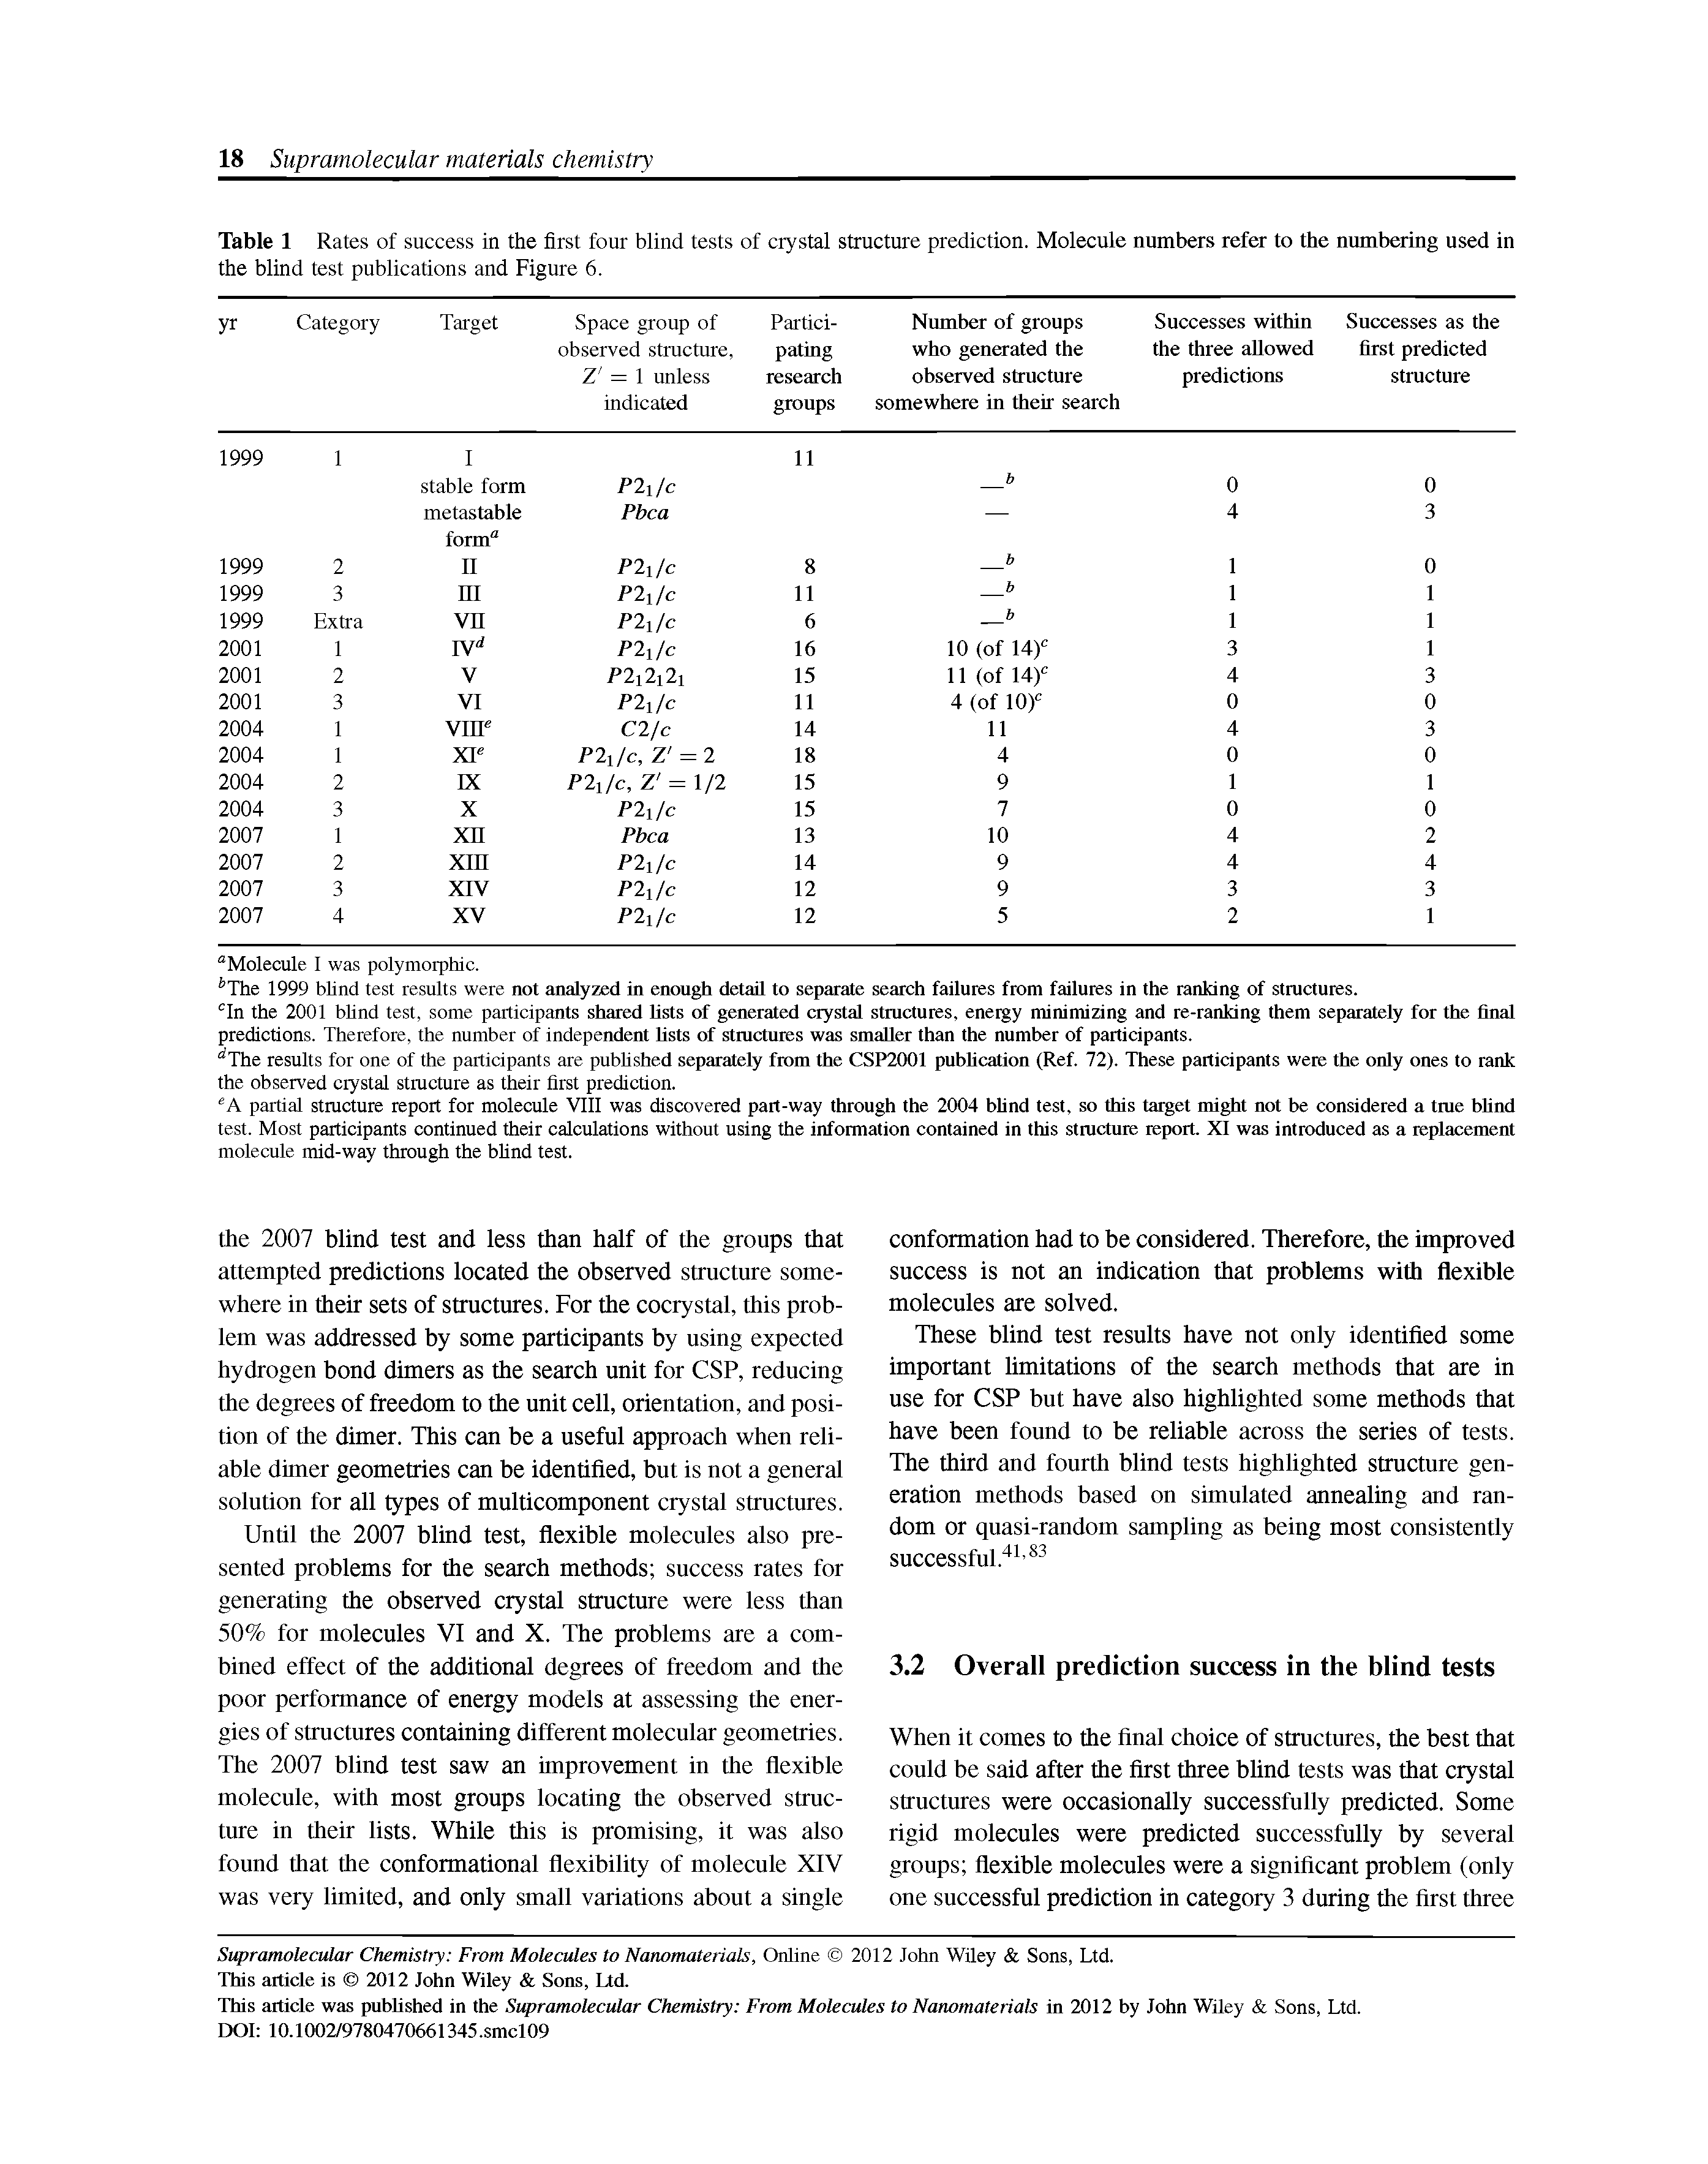 Table 1 Rates of success in the first four blind tests of crystal structure prediction. Molecule numbers refer to the numbering used in the blind test publications and Figure 6.